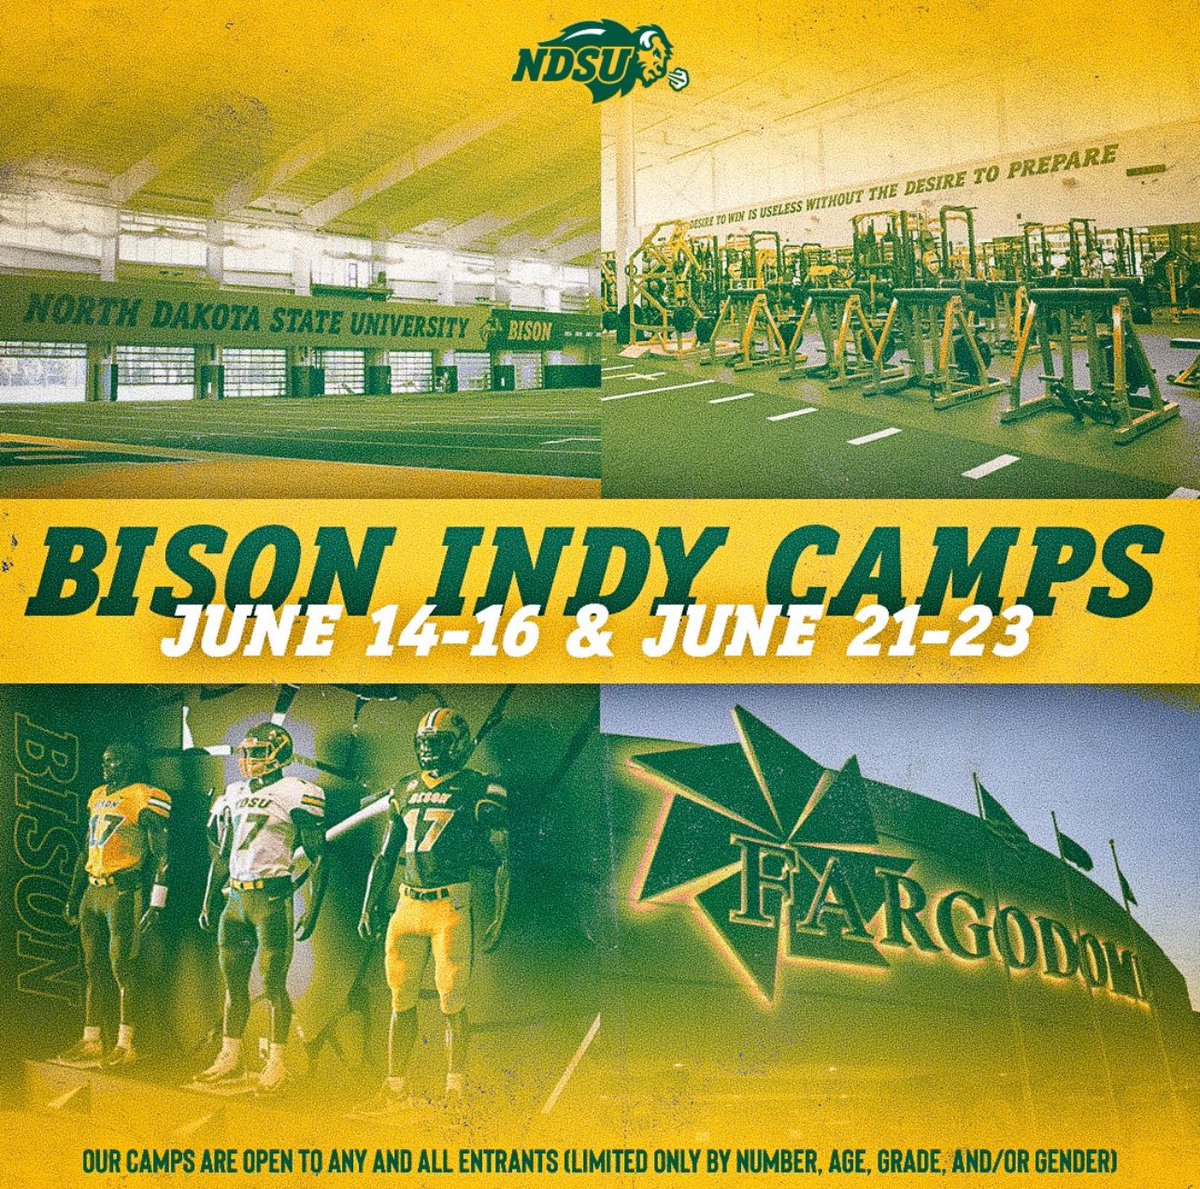 Thank you @NDSUfootball #GoBison🦬@CoachTimNDSU @FBCoachLarson @DavidWienke15 for the invite to visit campus and the opportunity to compete. I will do my best to get out to Fargo. #HeHimNasty @CaseEagleFB @AntonGraham_ @OLMafia @d_esposito44 @MJ_NFLDraft @McNamaraRivals…